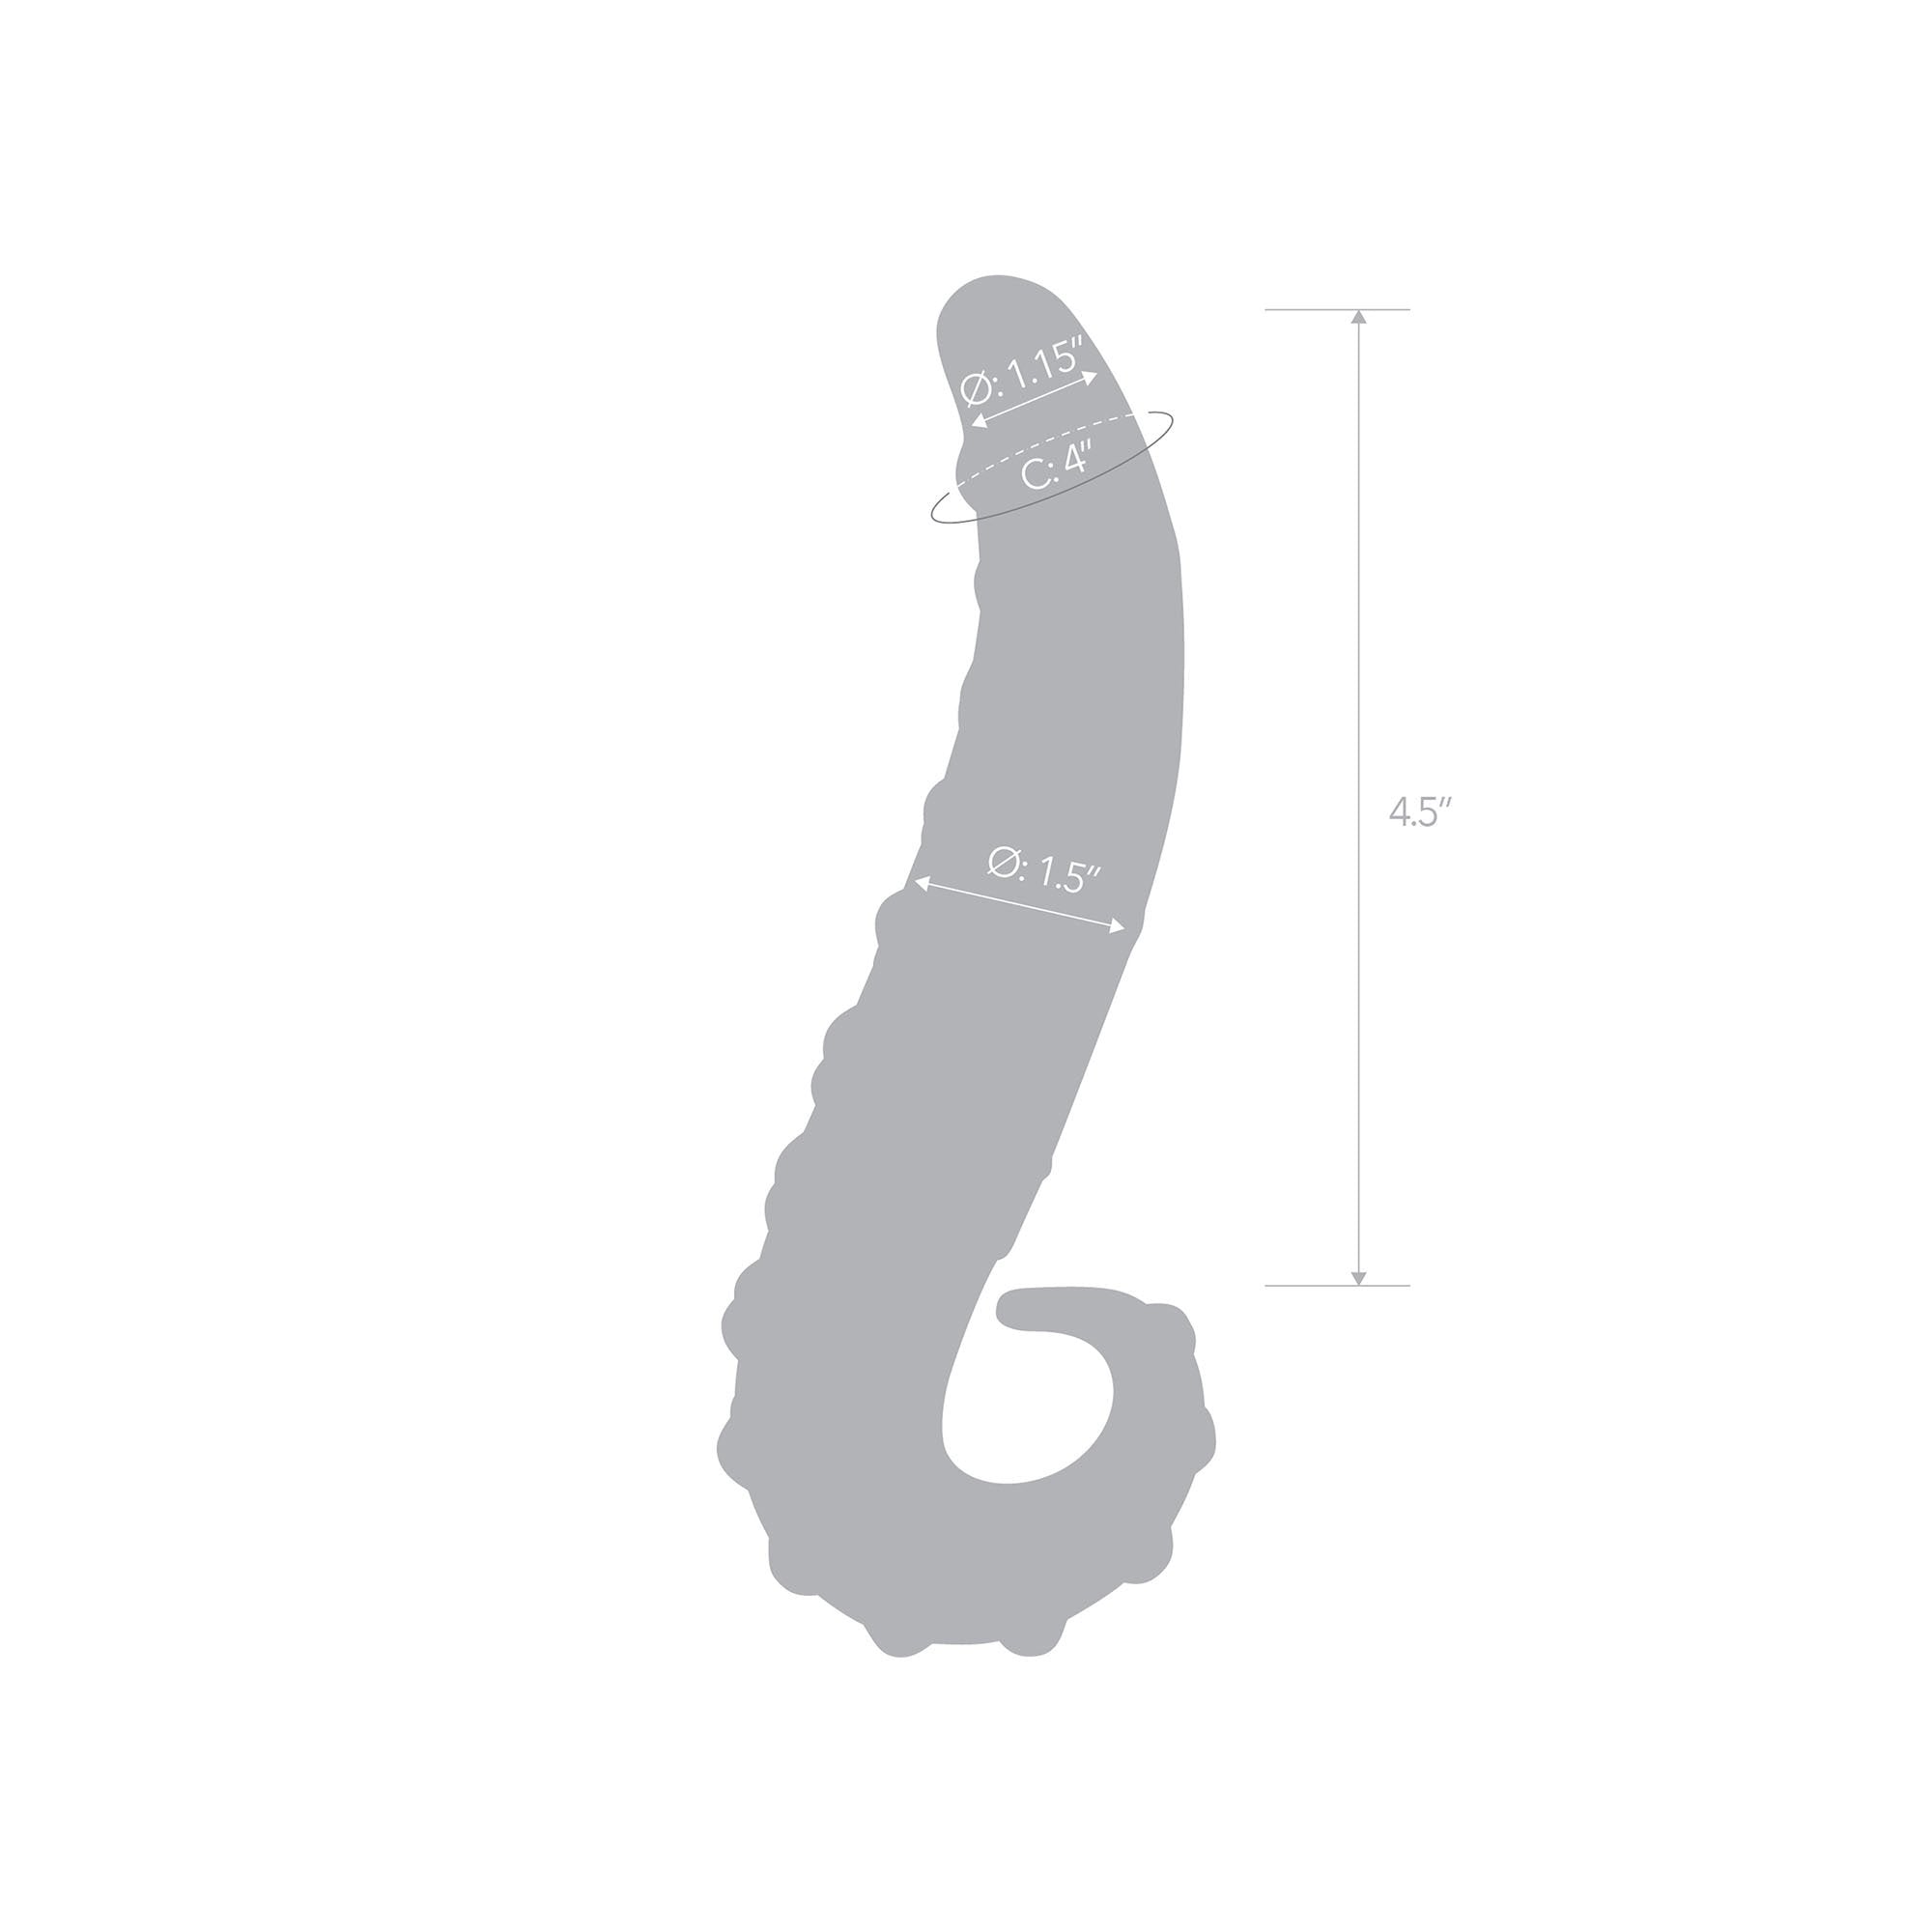 Specifications of the 6 inch Lick-it Glass Dildo